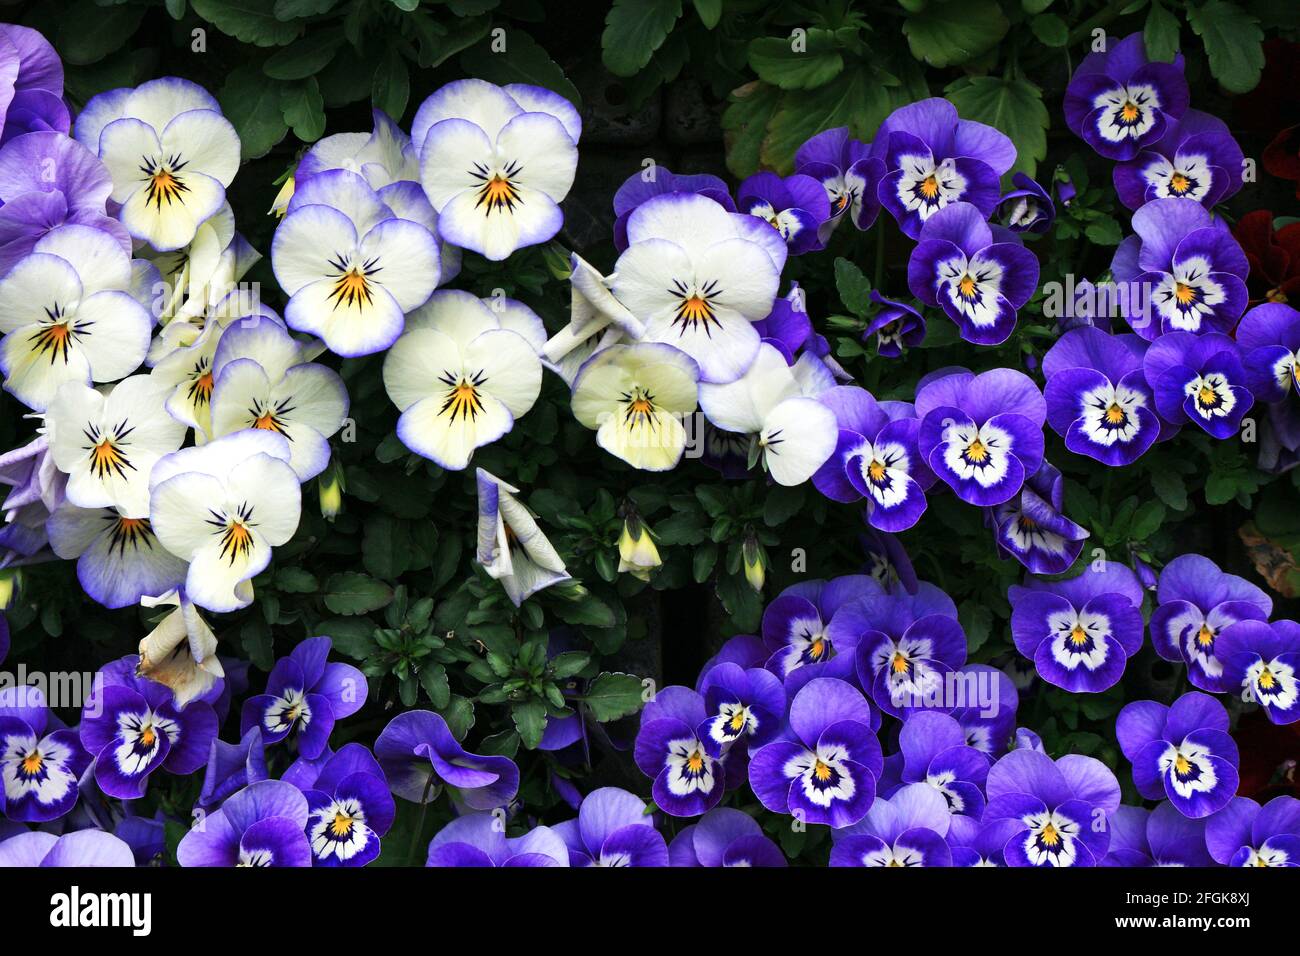 Brightly colored pansy flowers in full bloom Stock Photo